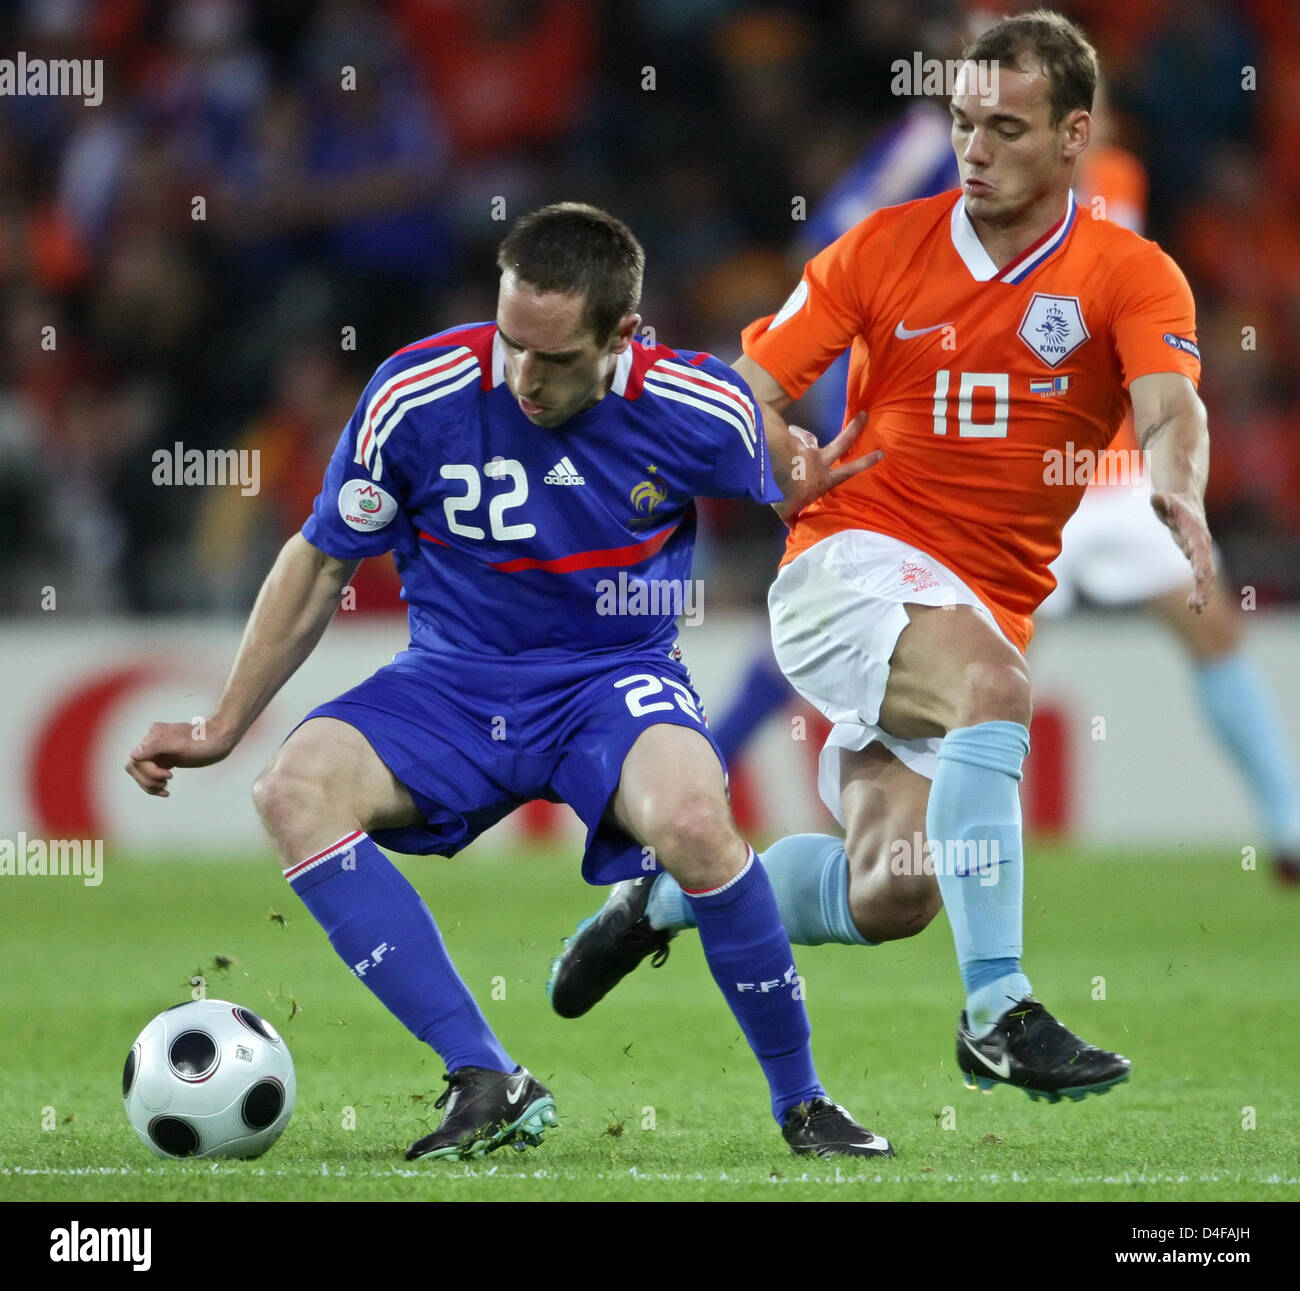 Wesley Sneijder (R) of Netherlands vies with Franck Ribéry of France during the UEFA EURO 2008 Group C preliminary round match between Netherlands and France at the Stade de Suisse in Berne, Switzerland, 13 June 2008. The Netherlands won 4-1. Photo: Ronald Wittek +please note UEFA restrictions particulary in regard to slide shows and 'No Mobile Services'+ +++###dpa###+++ Stock Photo